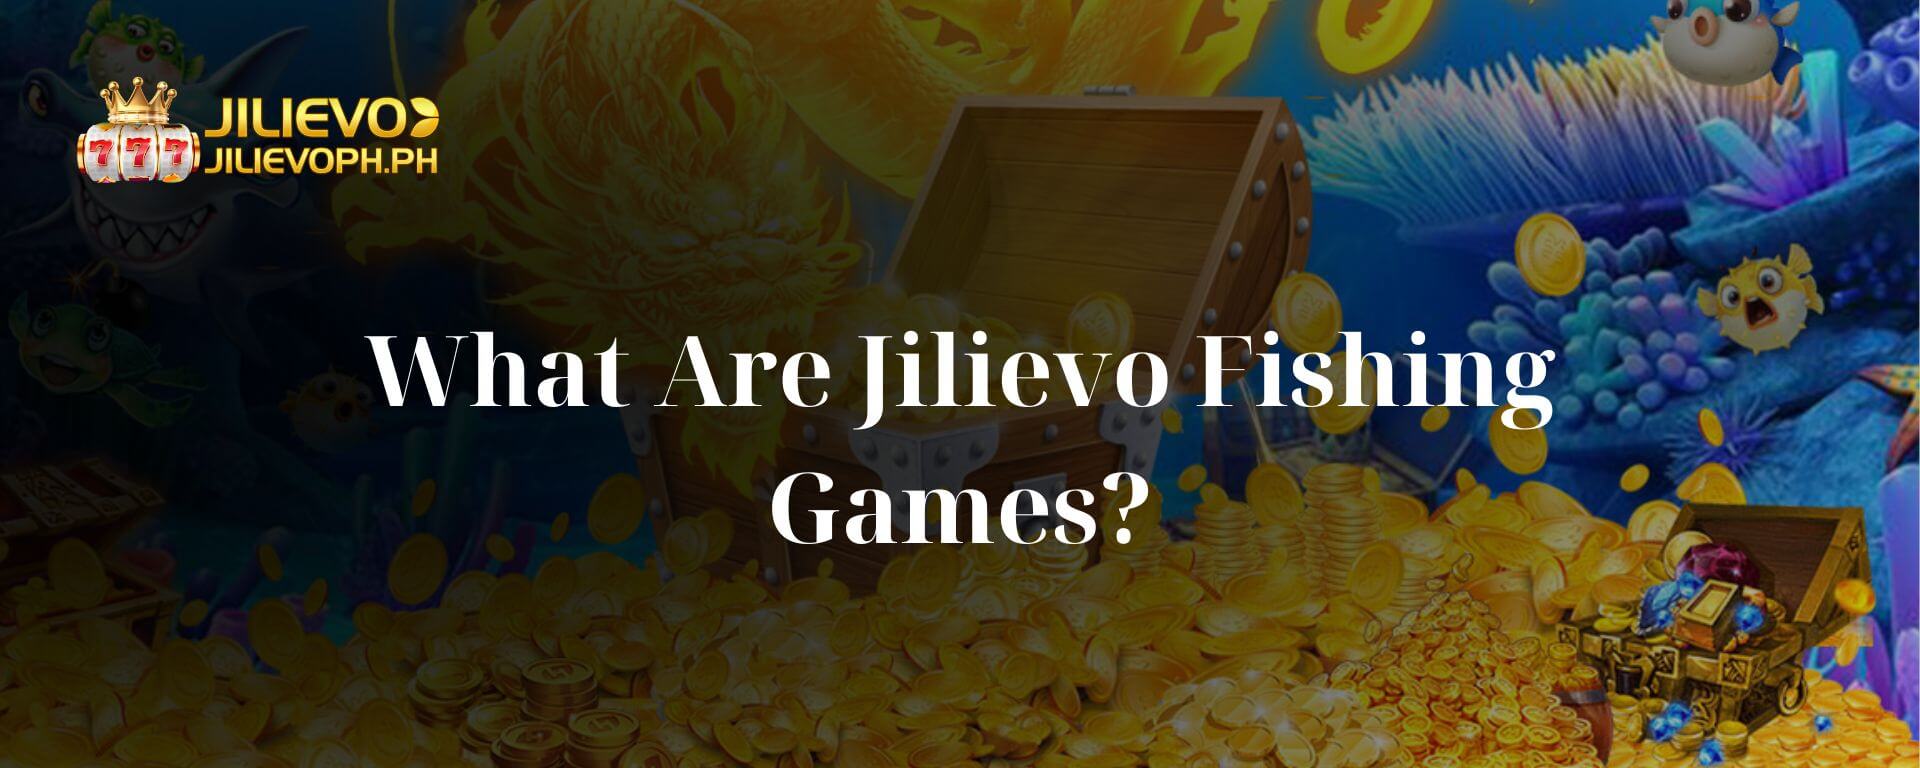 What Are Jilievo Fishing Games?